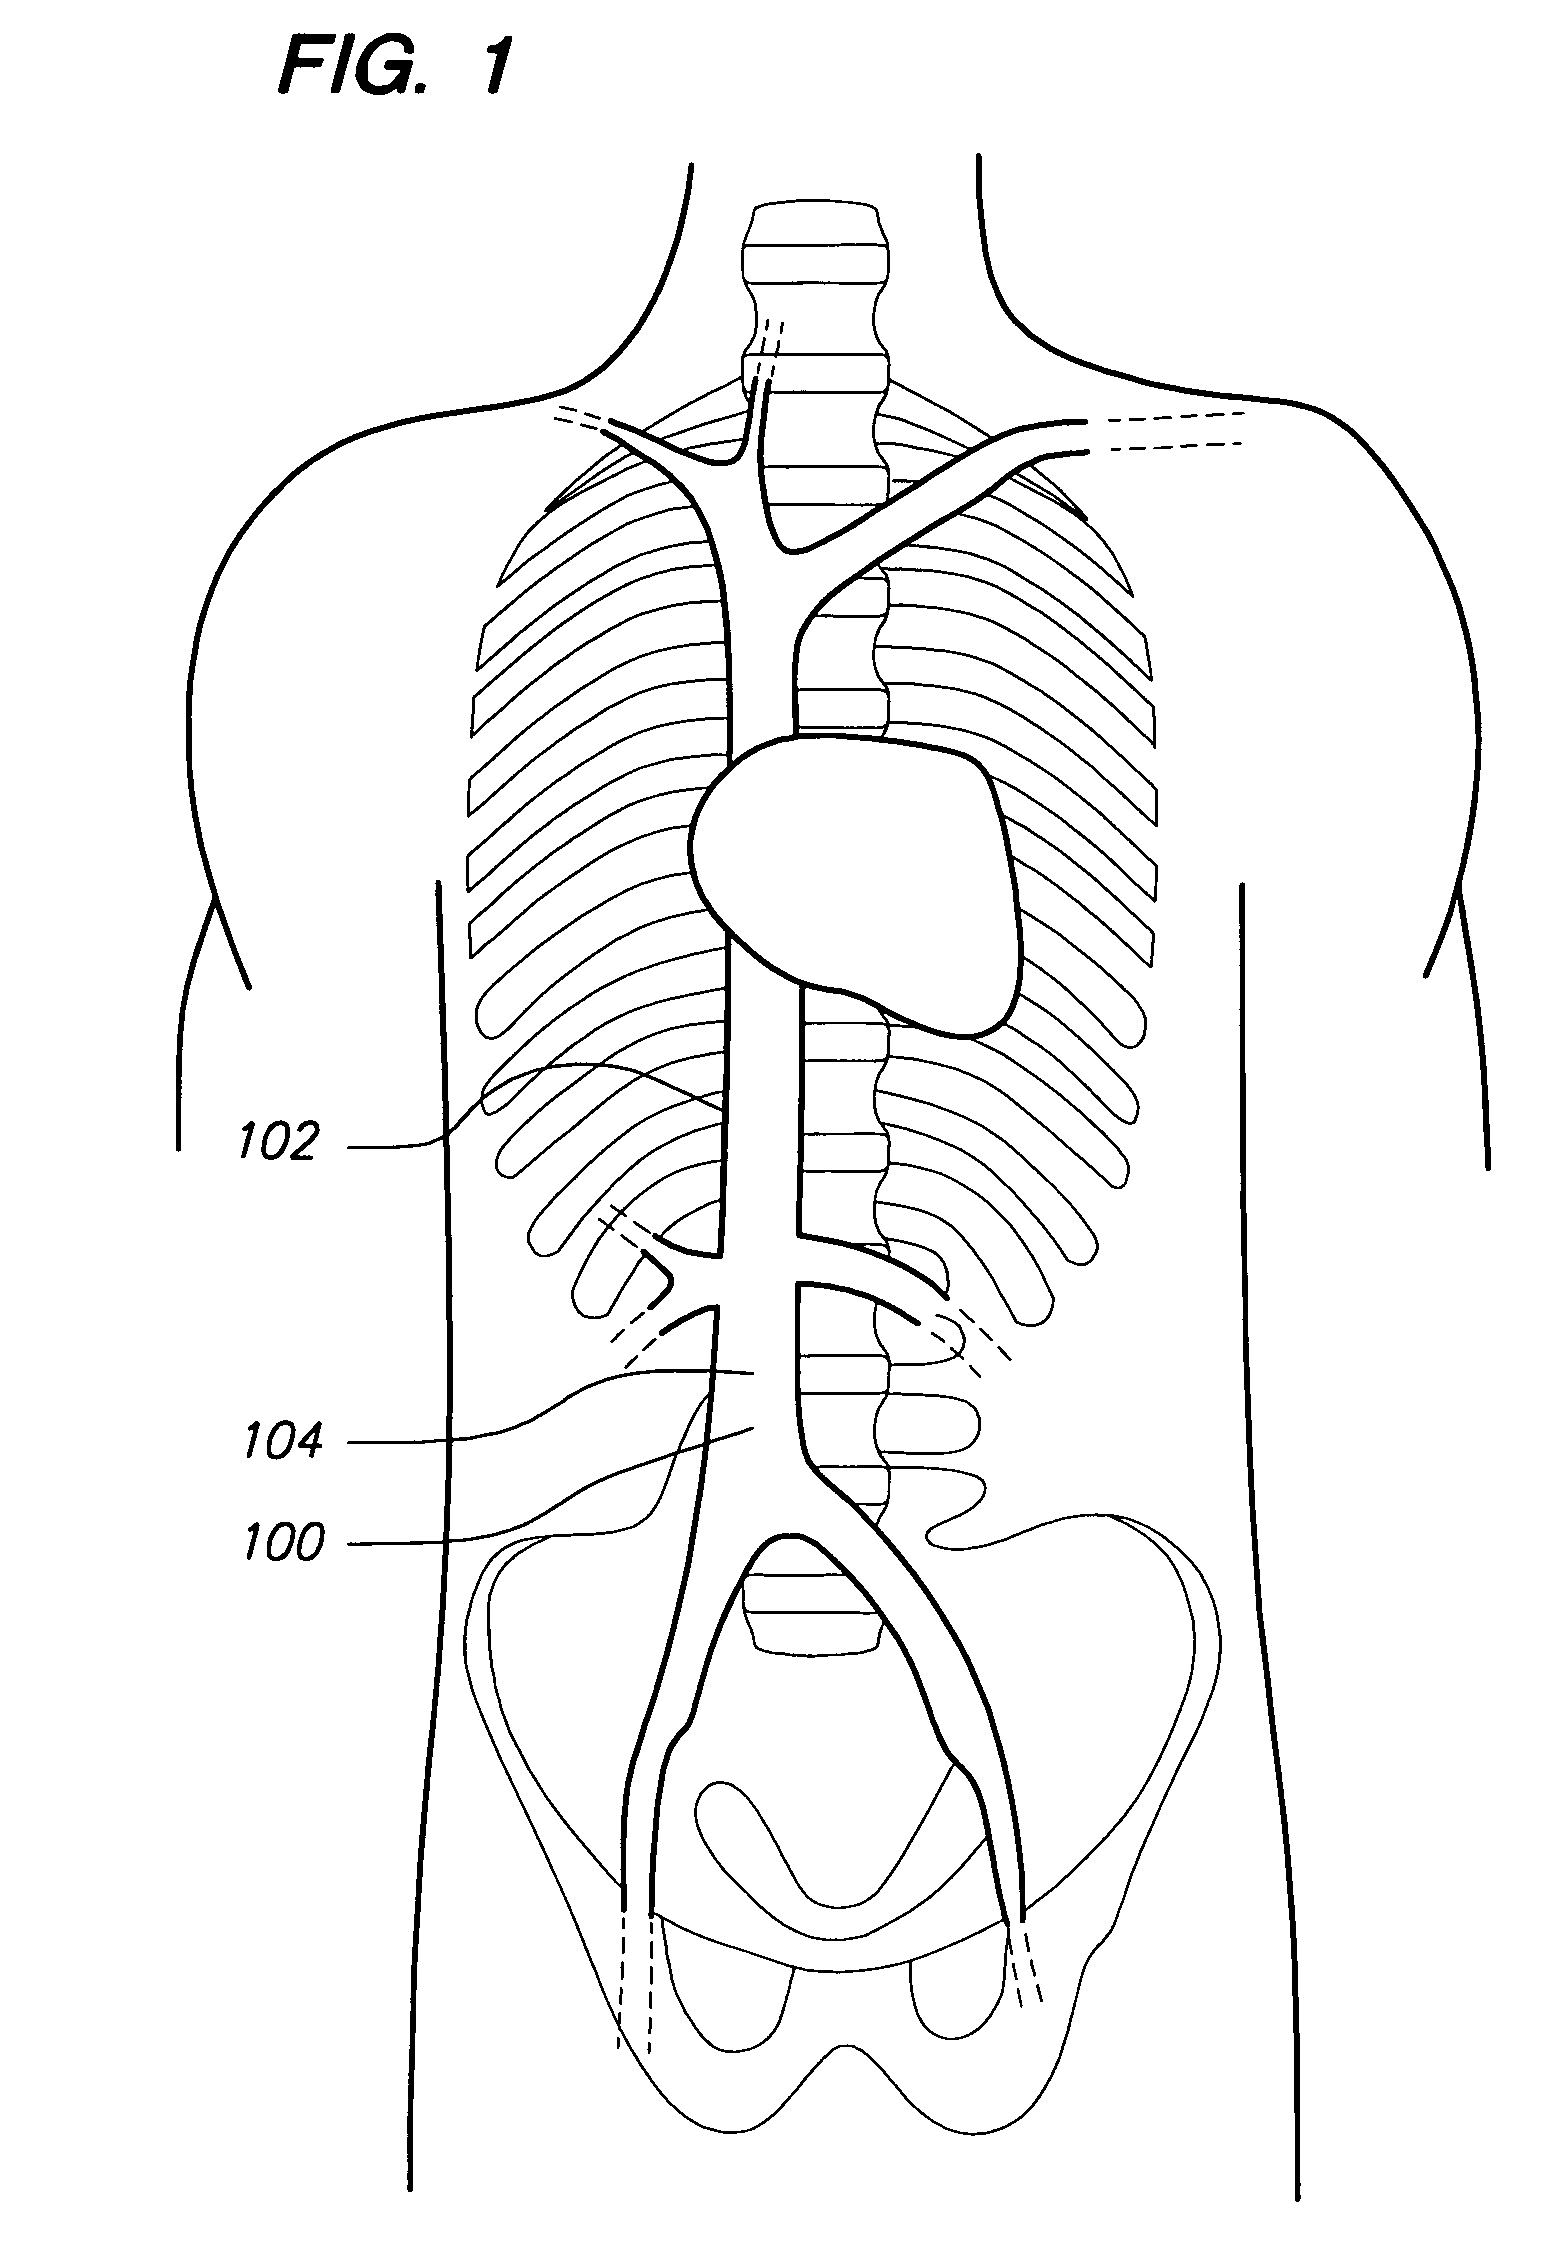 Removable vascular filter and method of filter placement